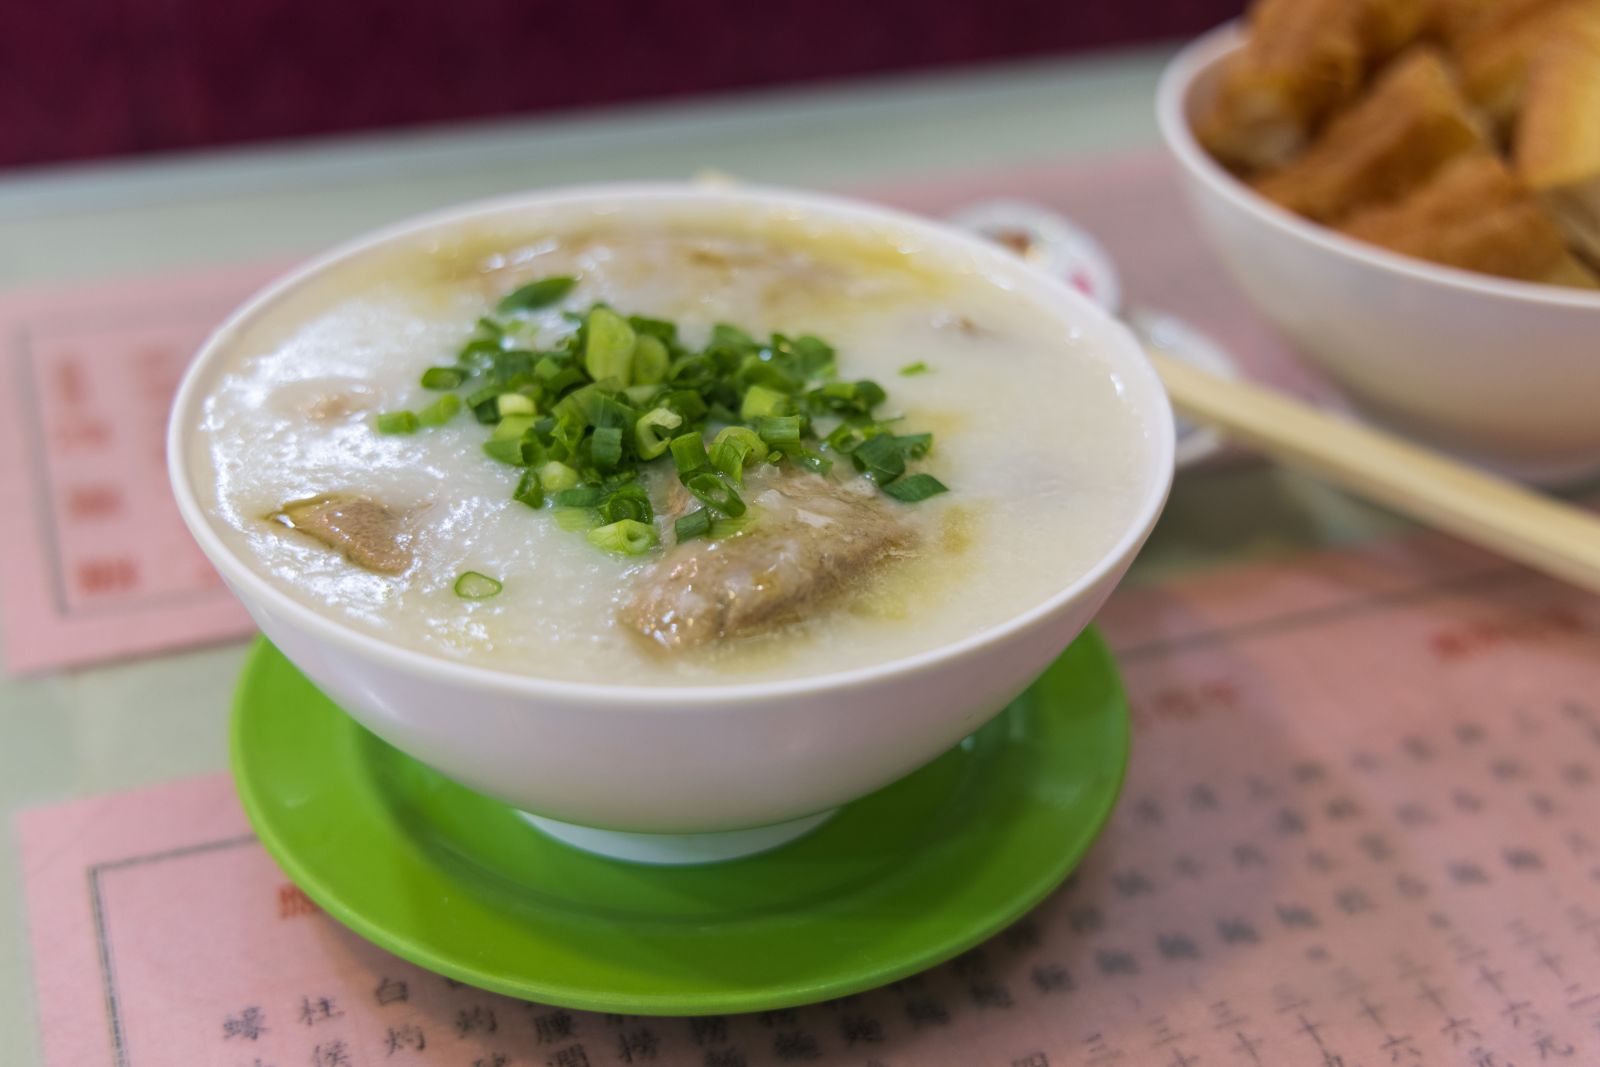 The Pig Giblets Congee (及第粥)